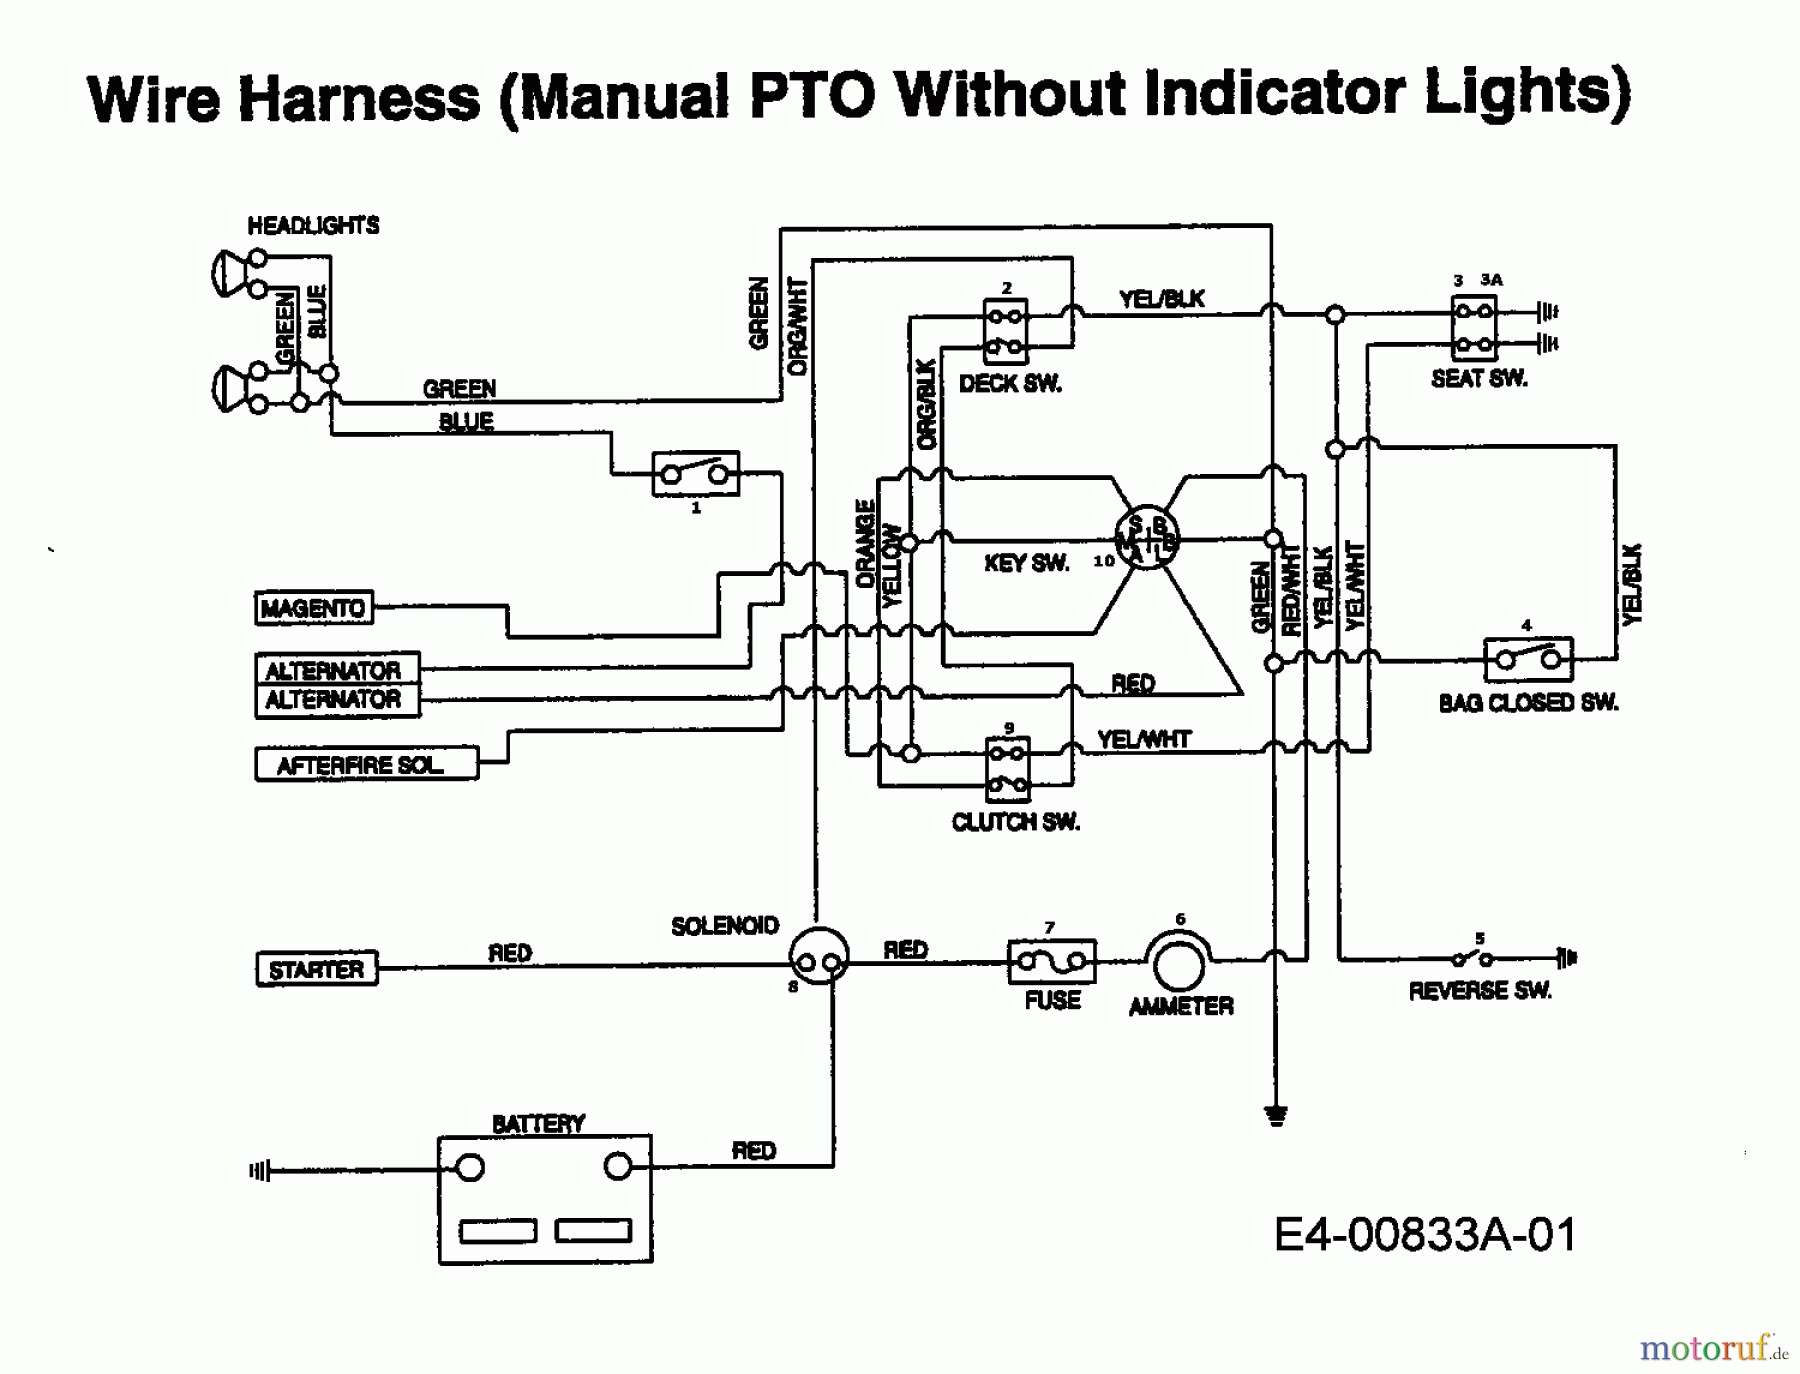  Edenparc Lawn tractors H 155102 13AD790N608  (1997) Wiring diagram without indicator lights